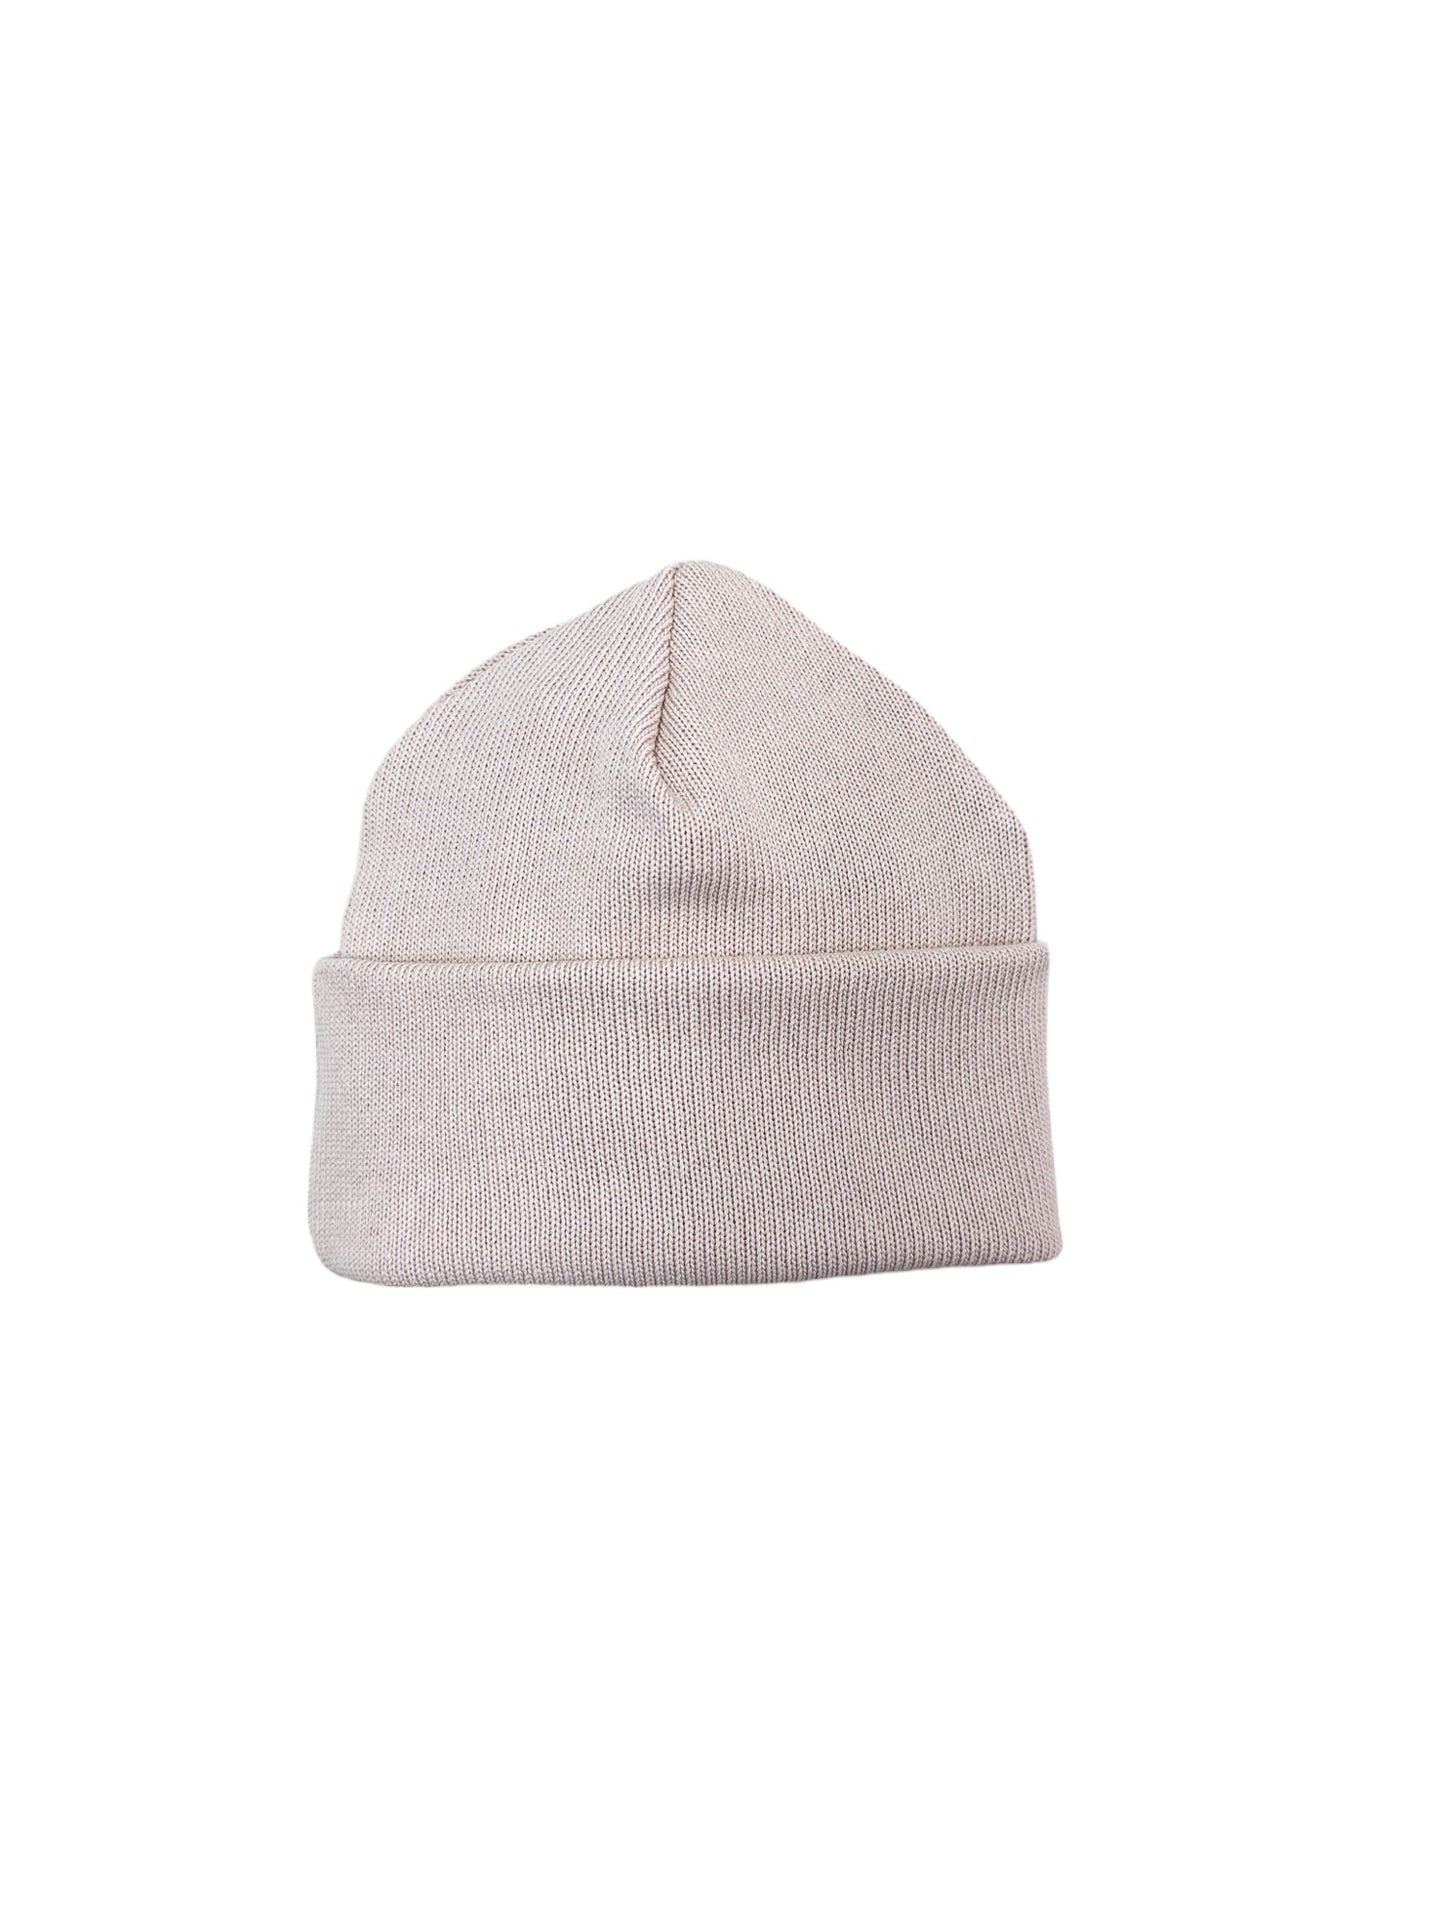 Load image into Gallery viewer, Knit beanie / light beige
